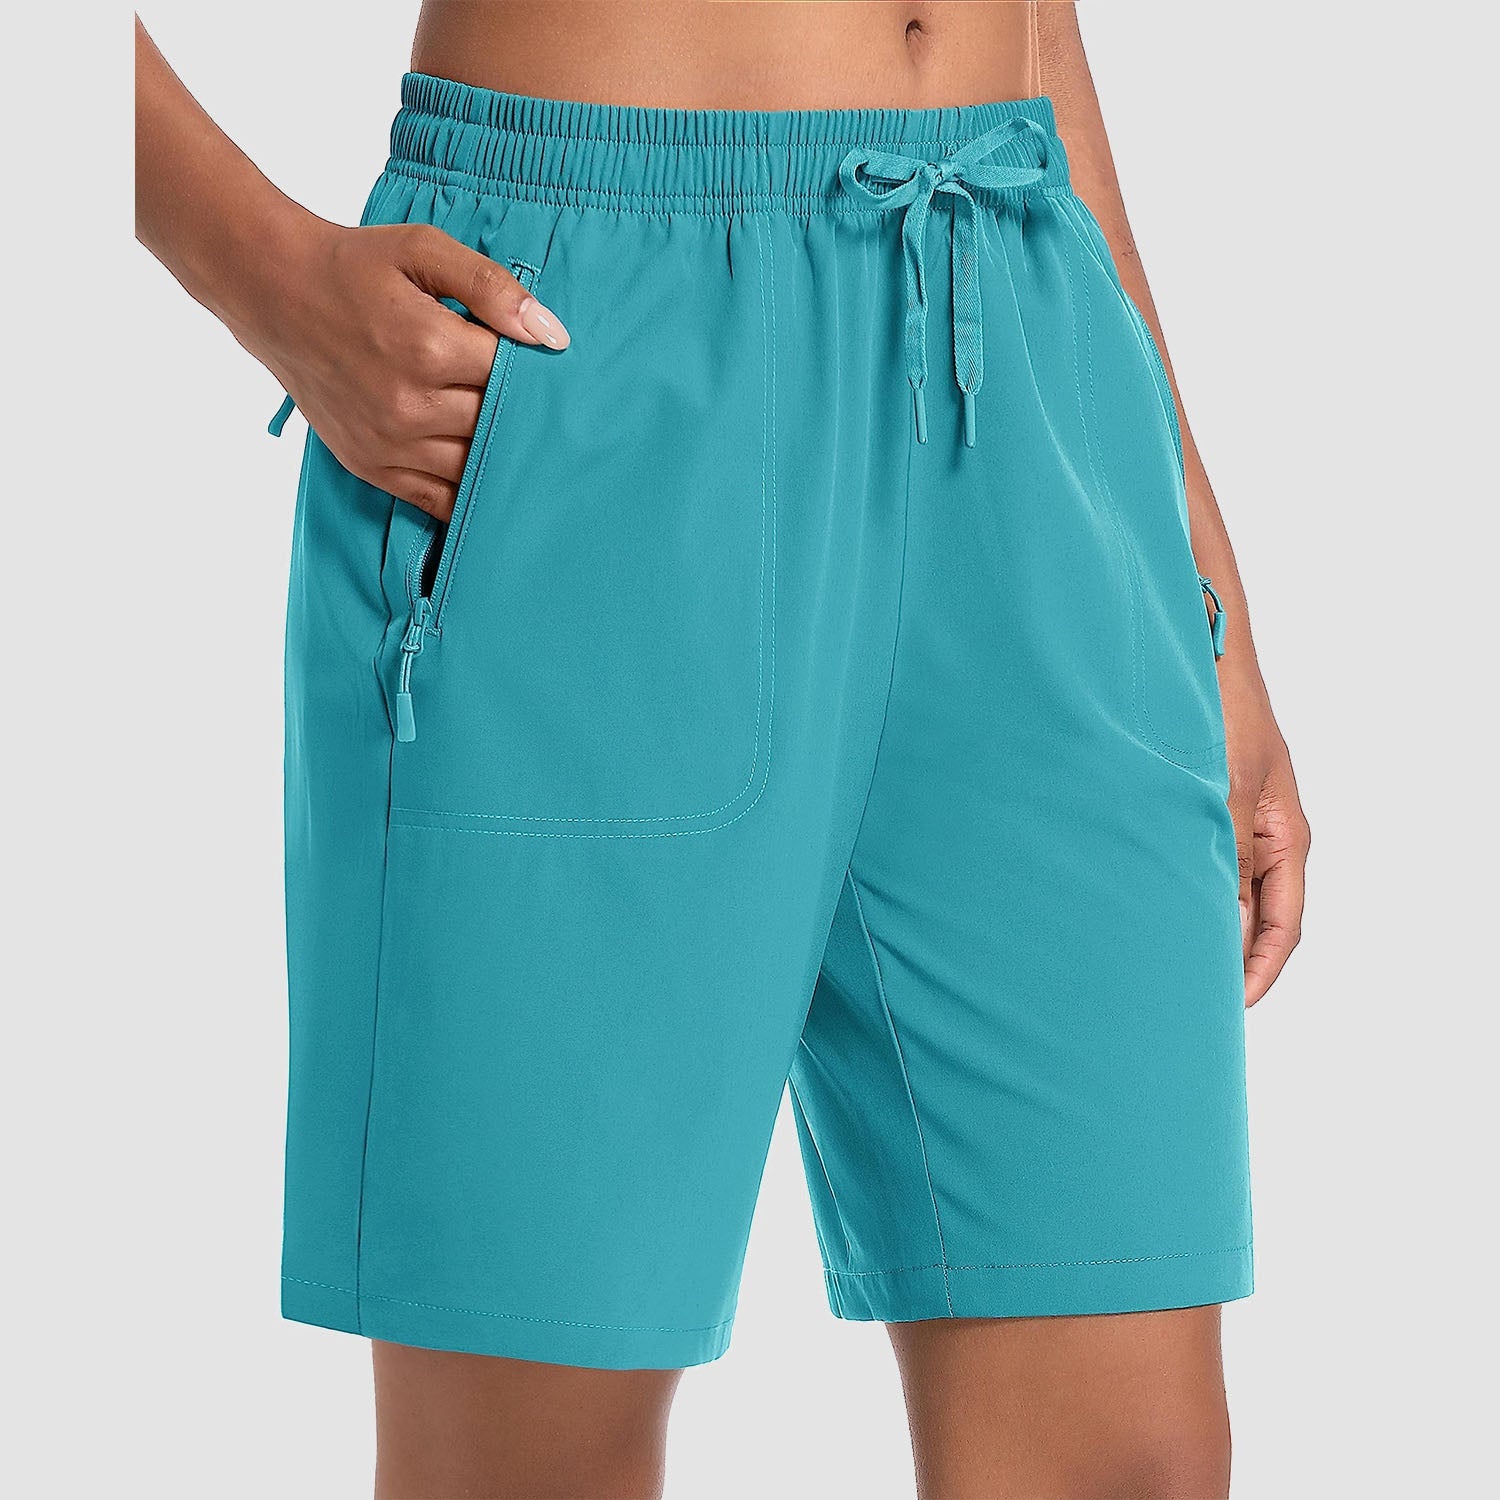 Women's Hiking Shorts Lightweight Quick Dry 8" Golf Shorts Water Resistant with 3 Zipper Pockets